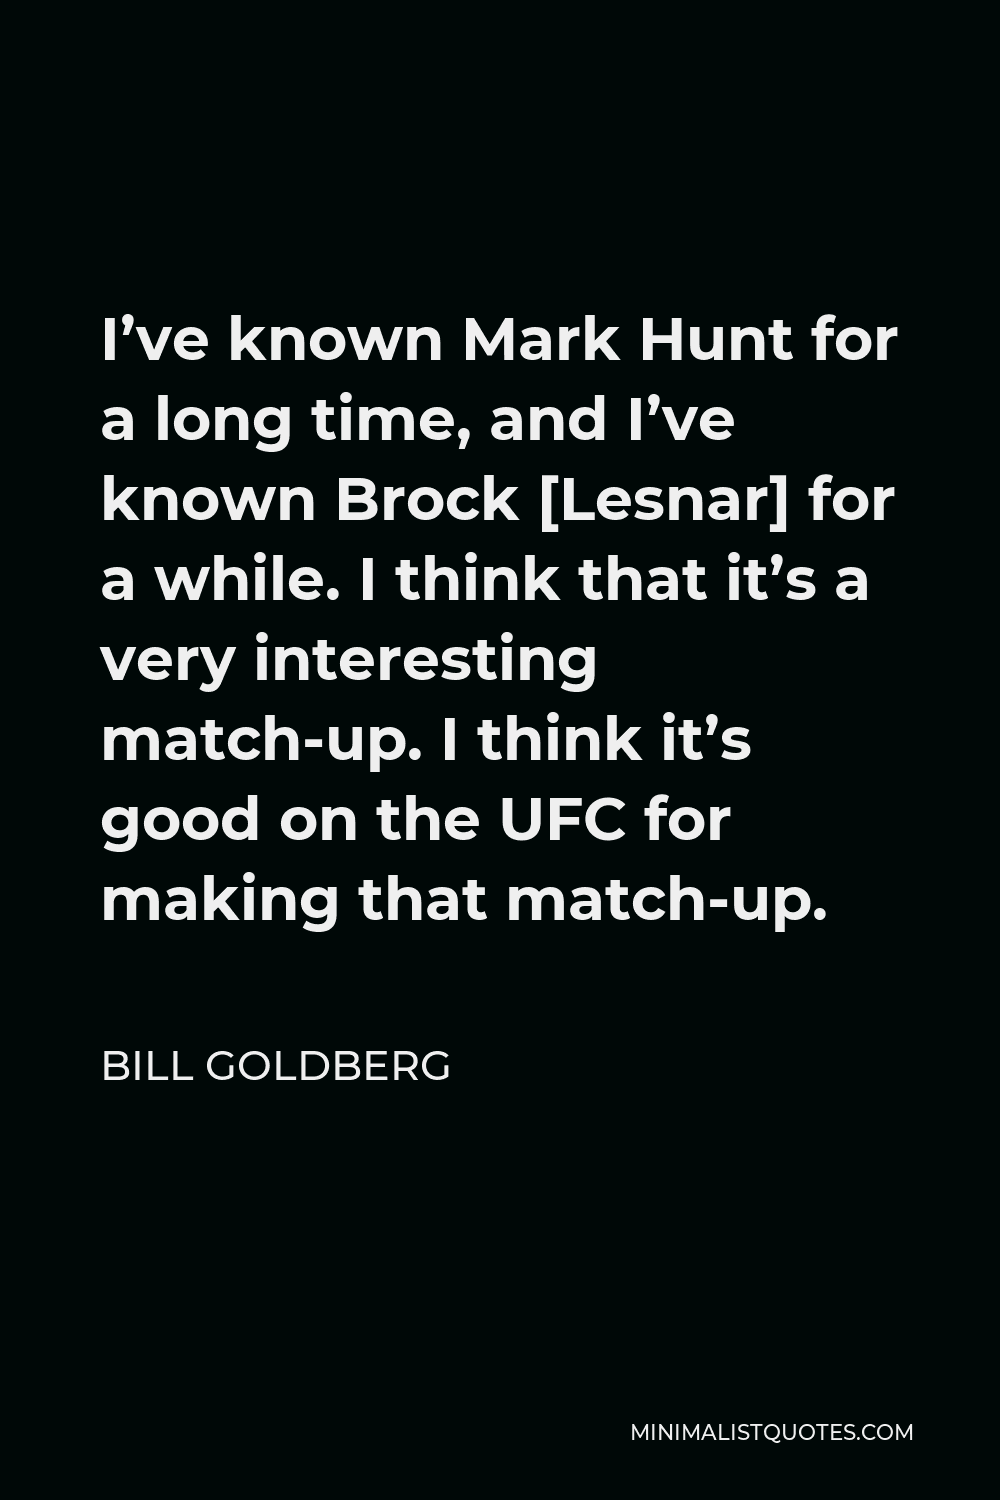 Bill Goldberg Quote - I’ve known Mark Hunt for a long time, and I’ve known Brock [Lesnar] for a while. I think that it’s a very interesting match-up. I think it’s good on the UFC for making that match-up.